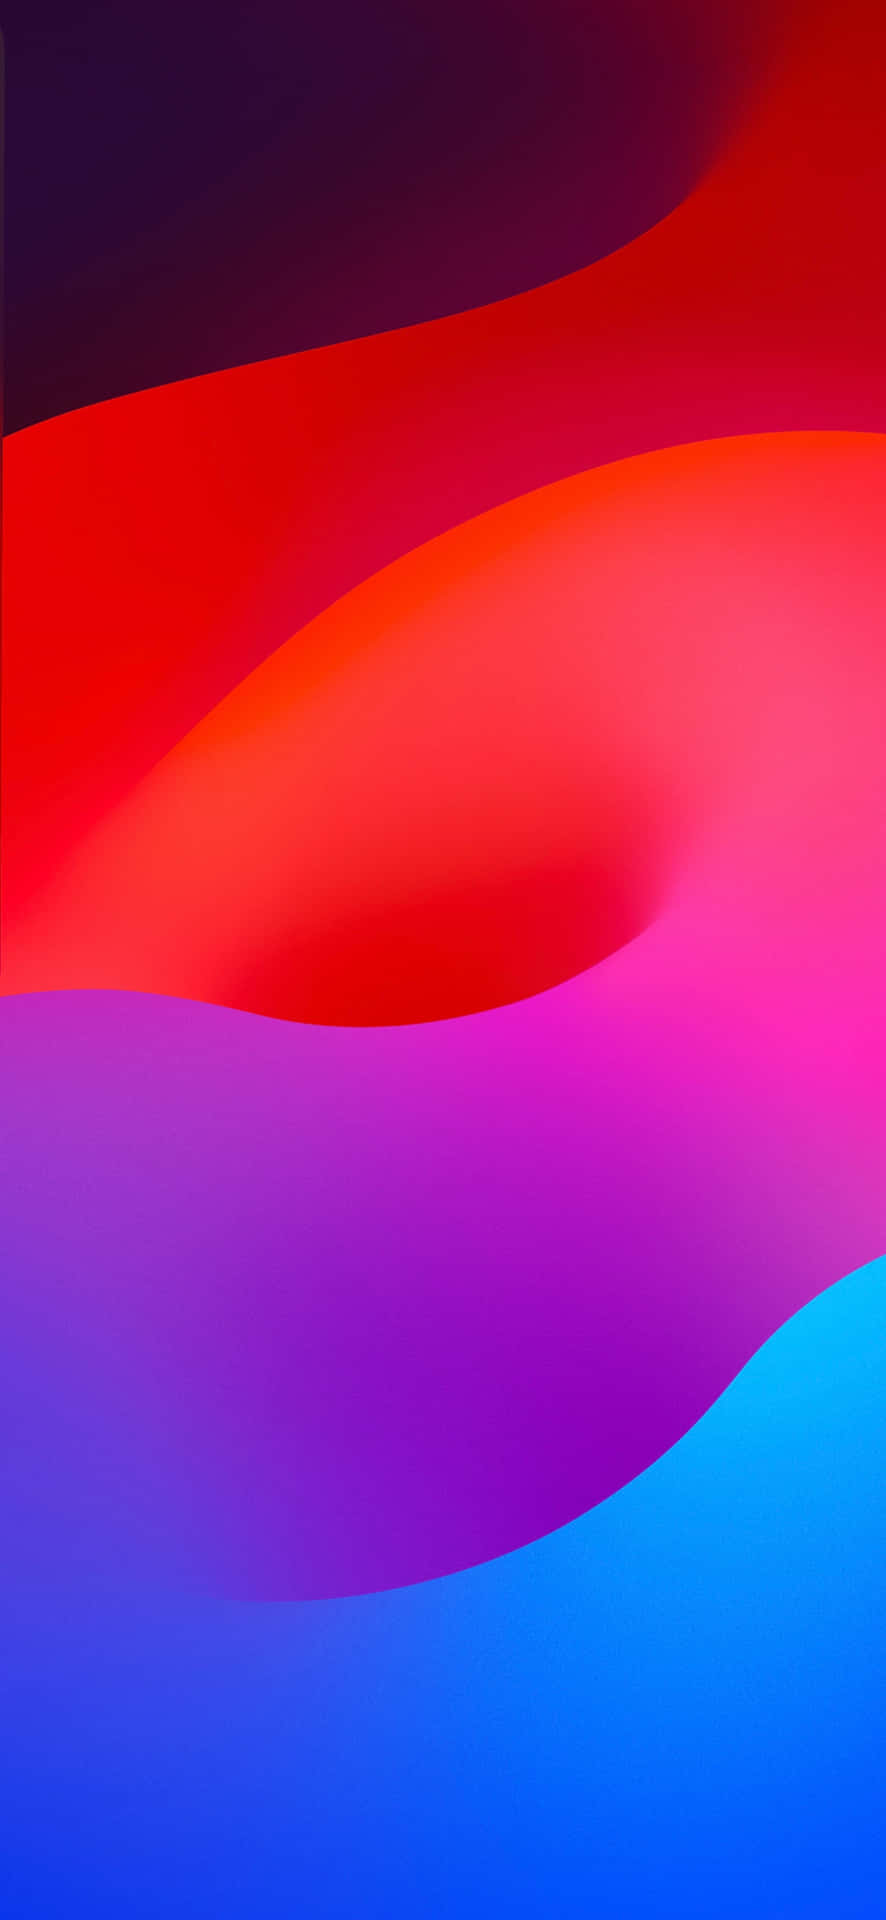 Download: New CarPlay & Home App Wallpapers From iOS 16 Beta 4